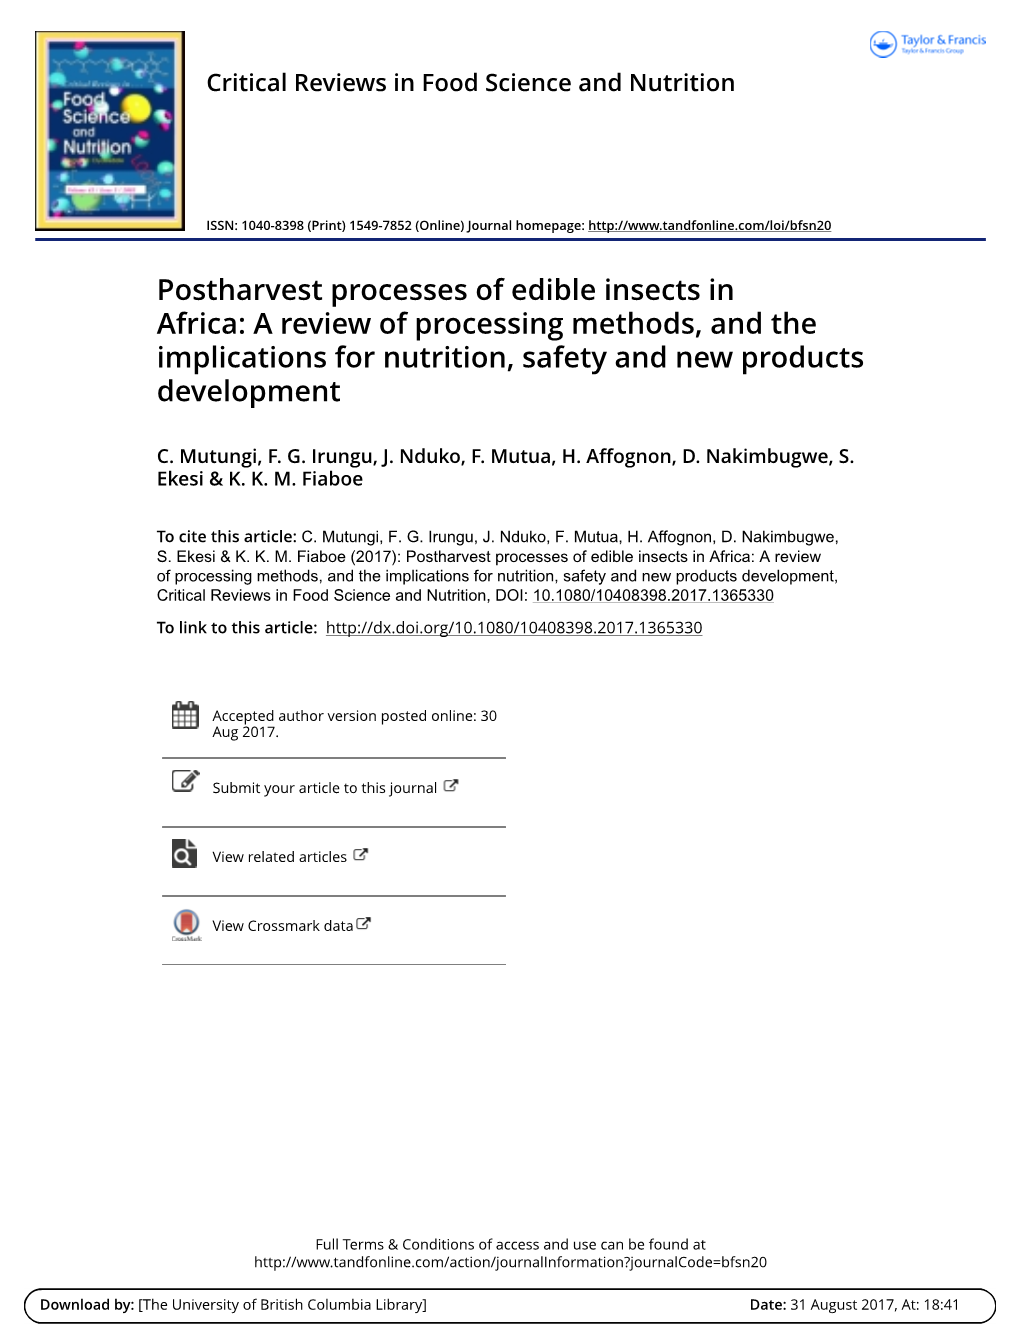 Postharvest Processes of Edible Insects in Africa: a Review of Processing Methods, and the Implications for Nutrition, Safety and New Products Development